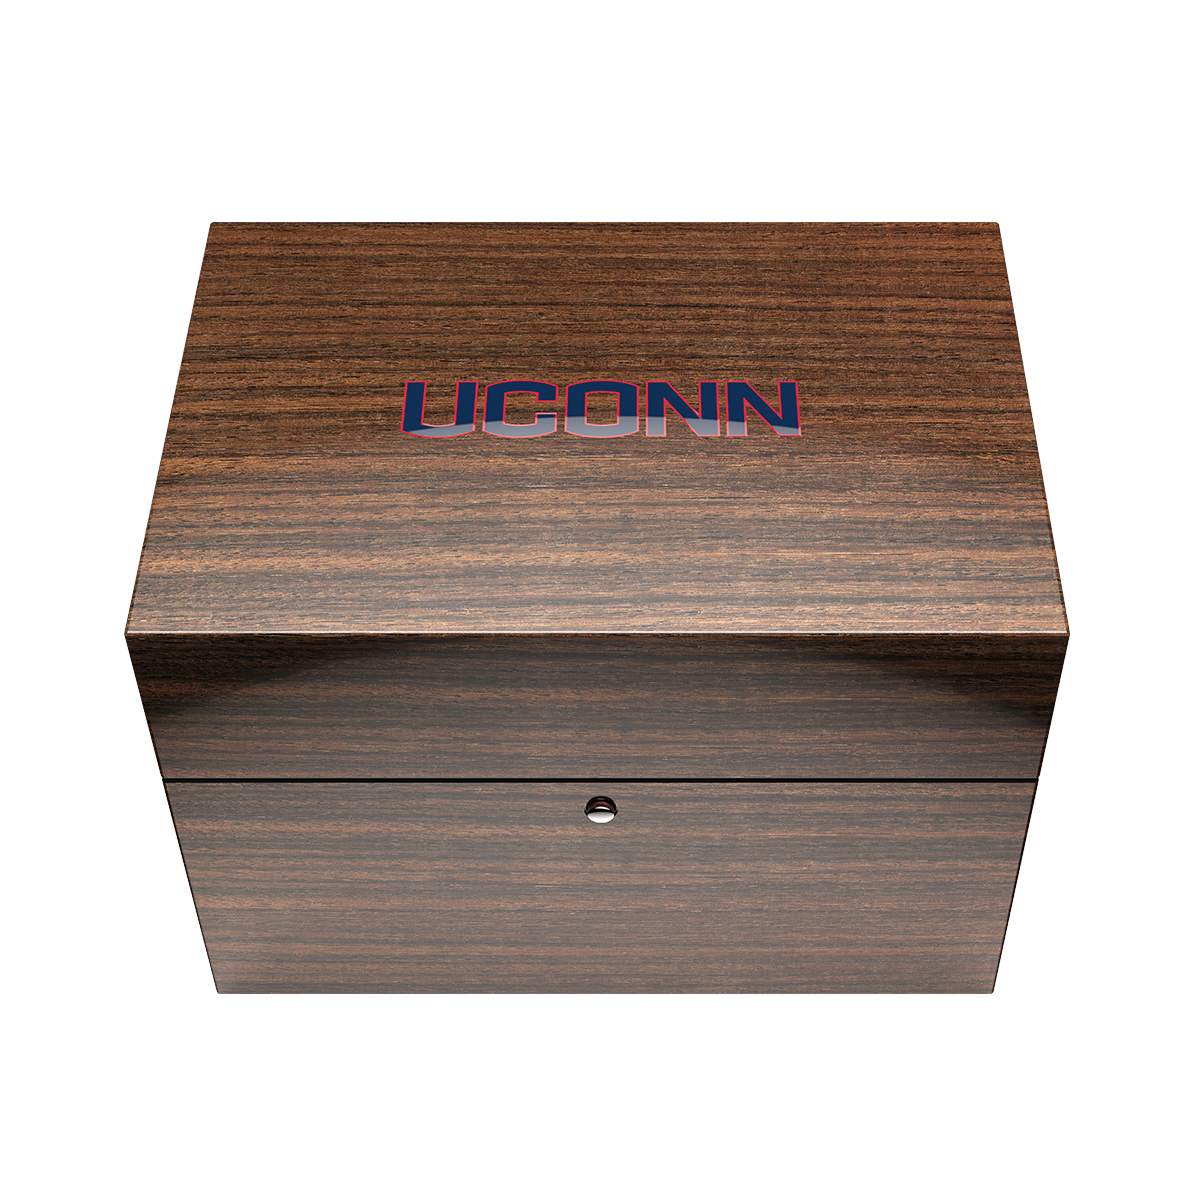 UCONN 2024 National Champions Swiss made automatic watch. Back to back champions. Wood display box, closed.